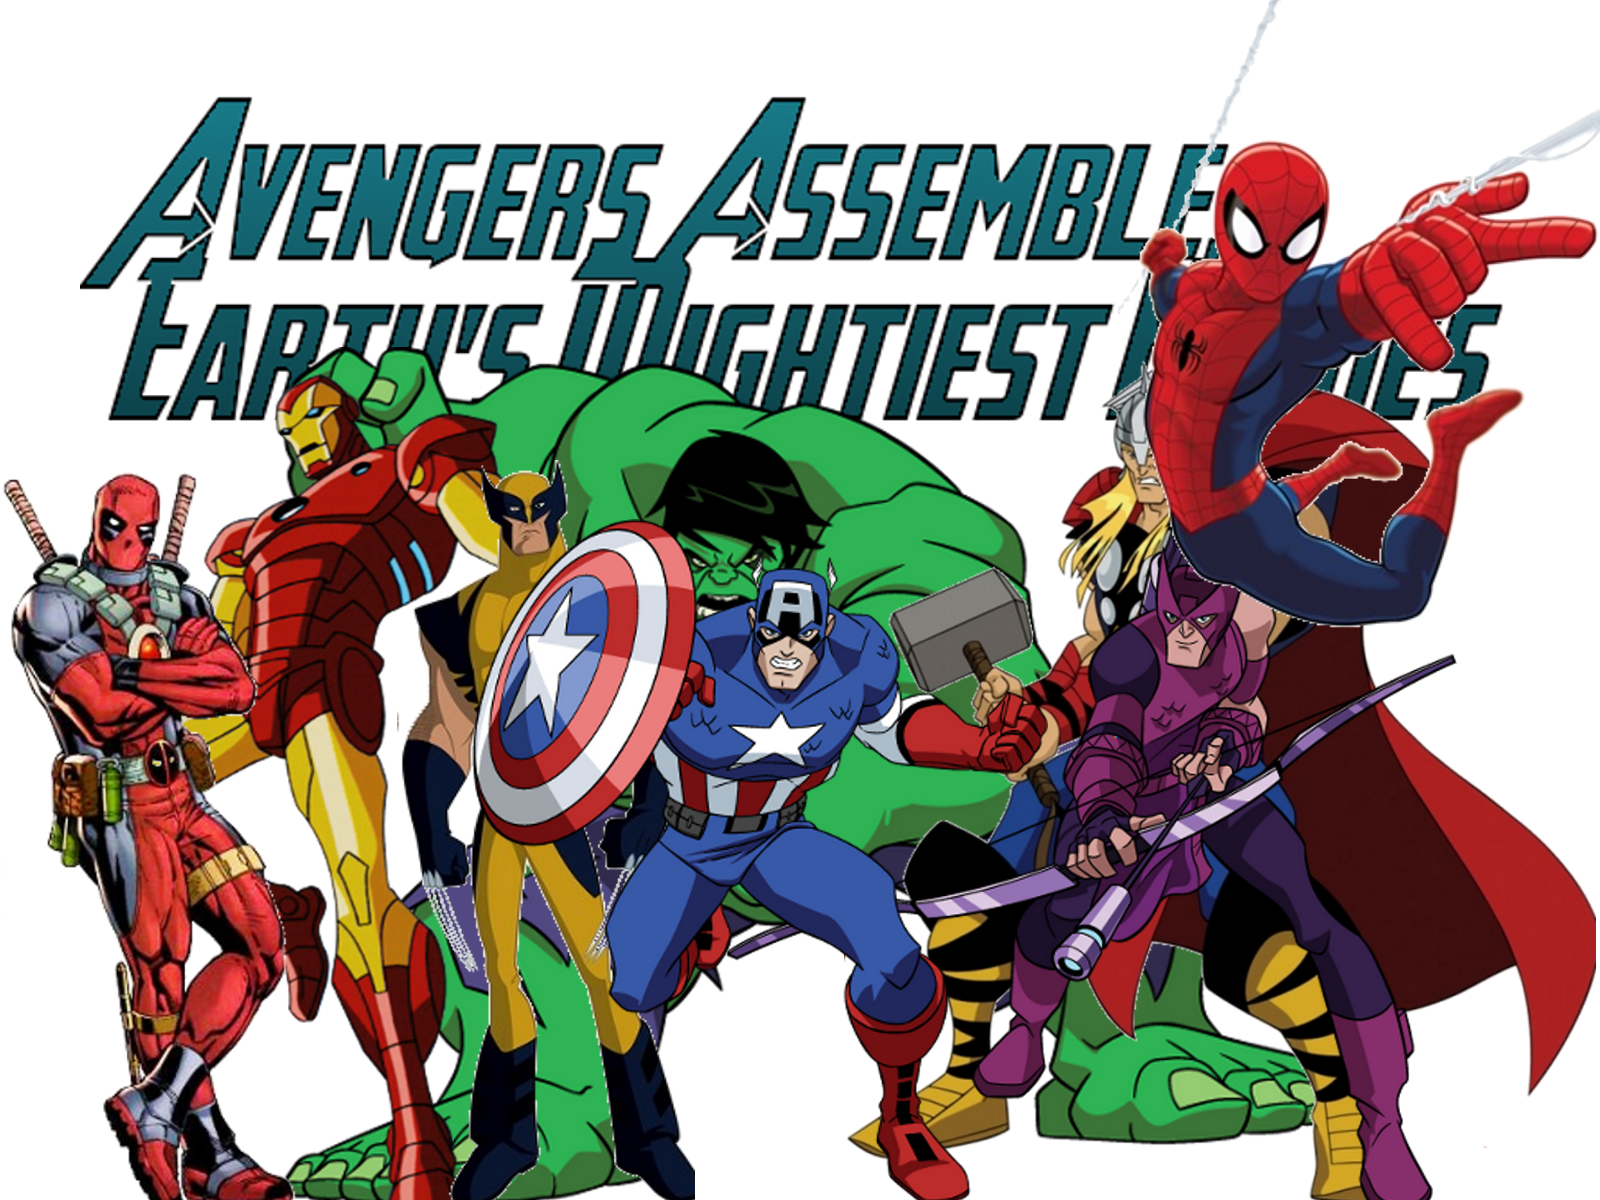 Avengers Assemble: Earth's Mightiest Heroes. Marvel Fanfiction